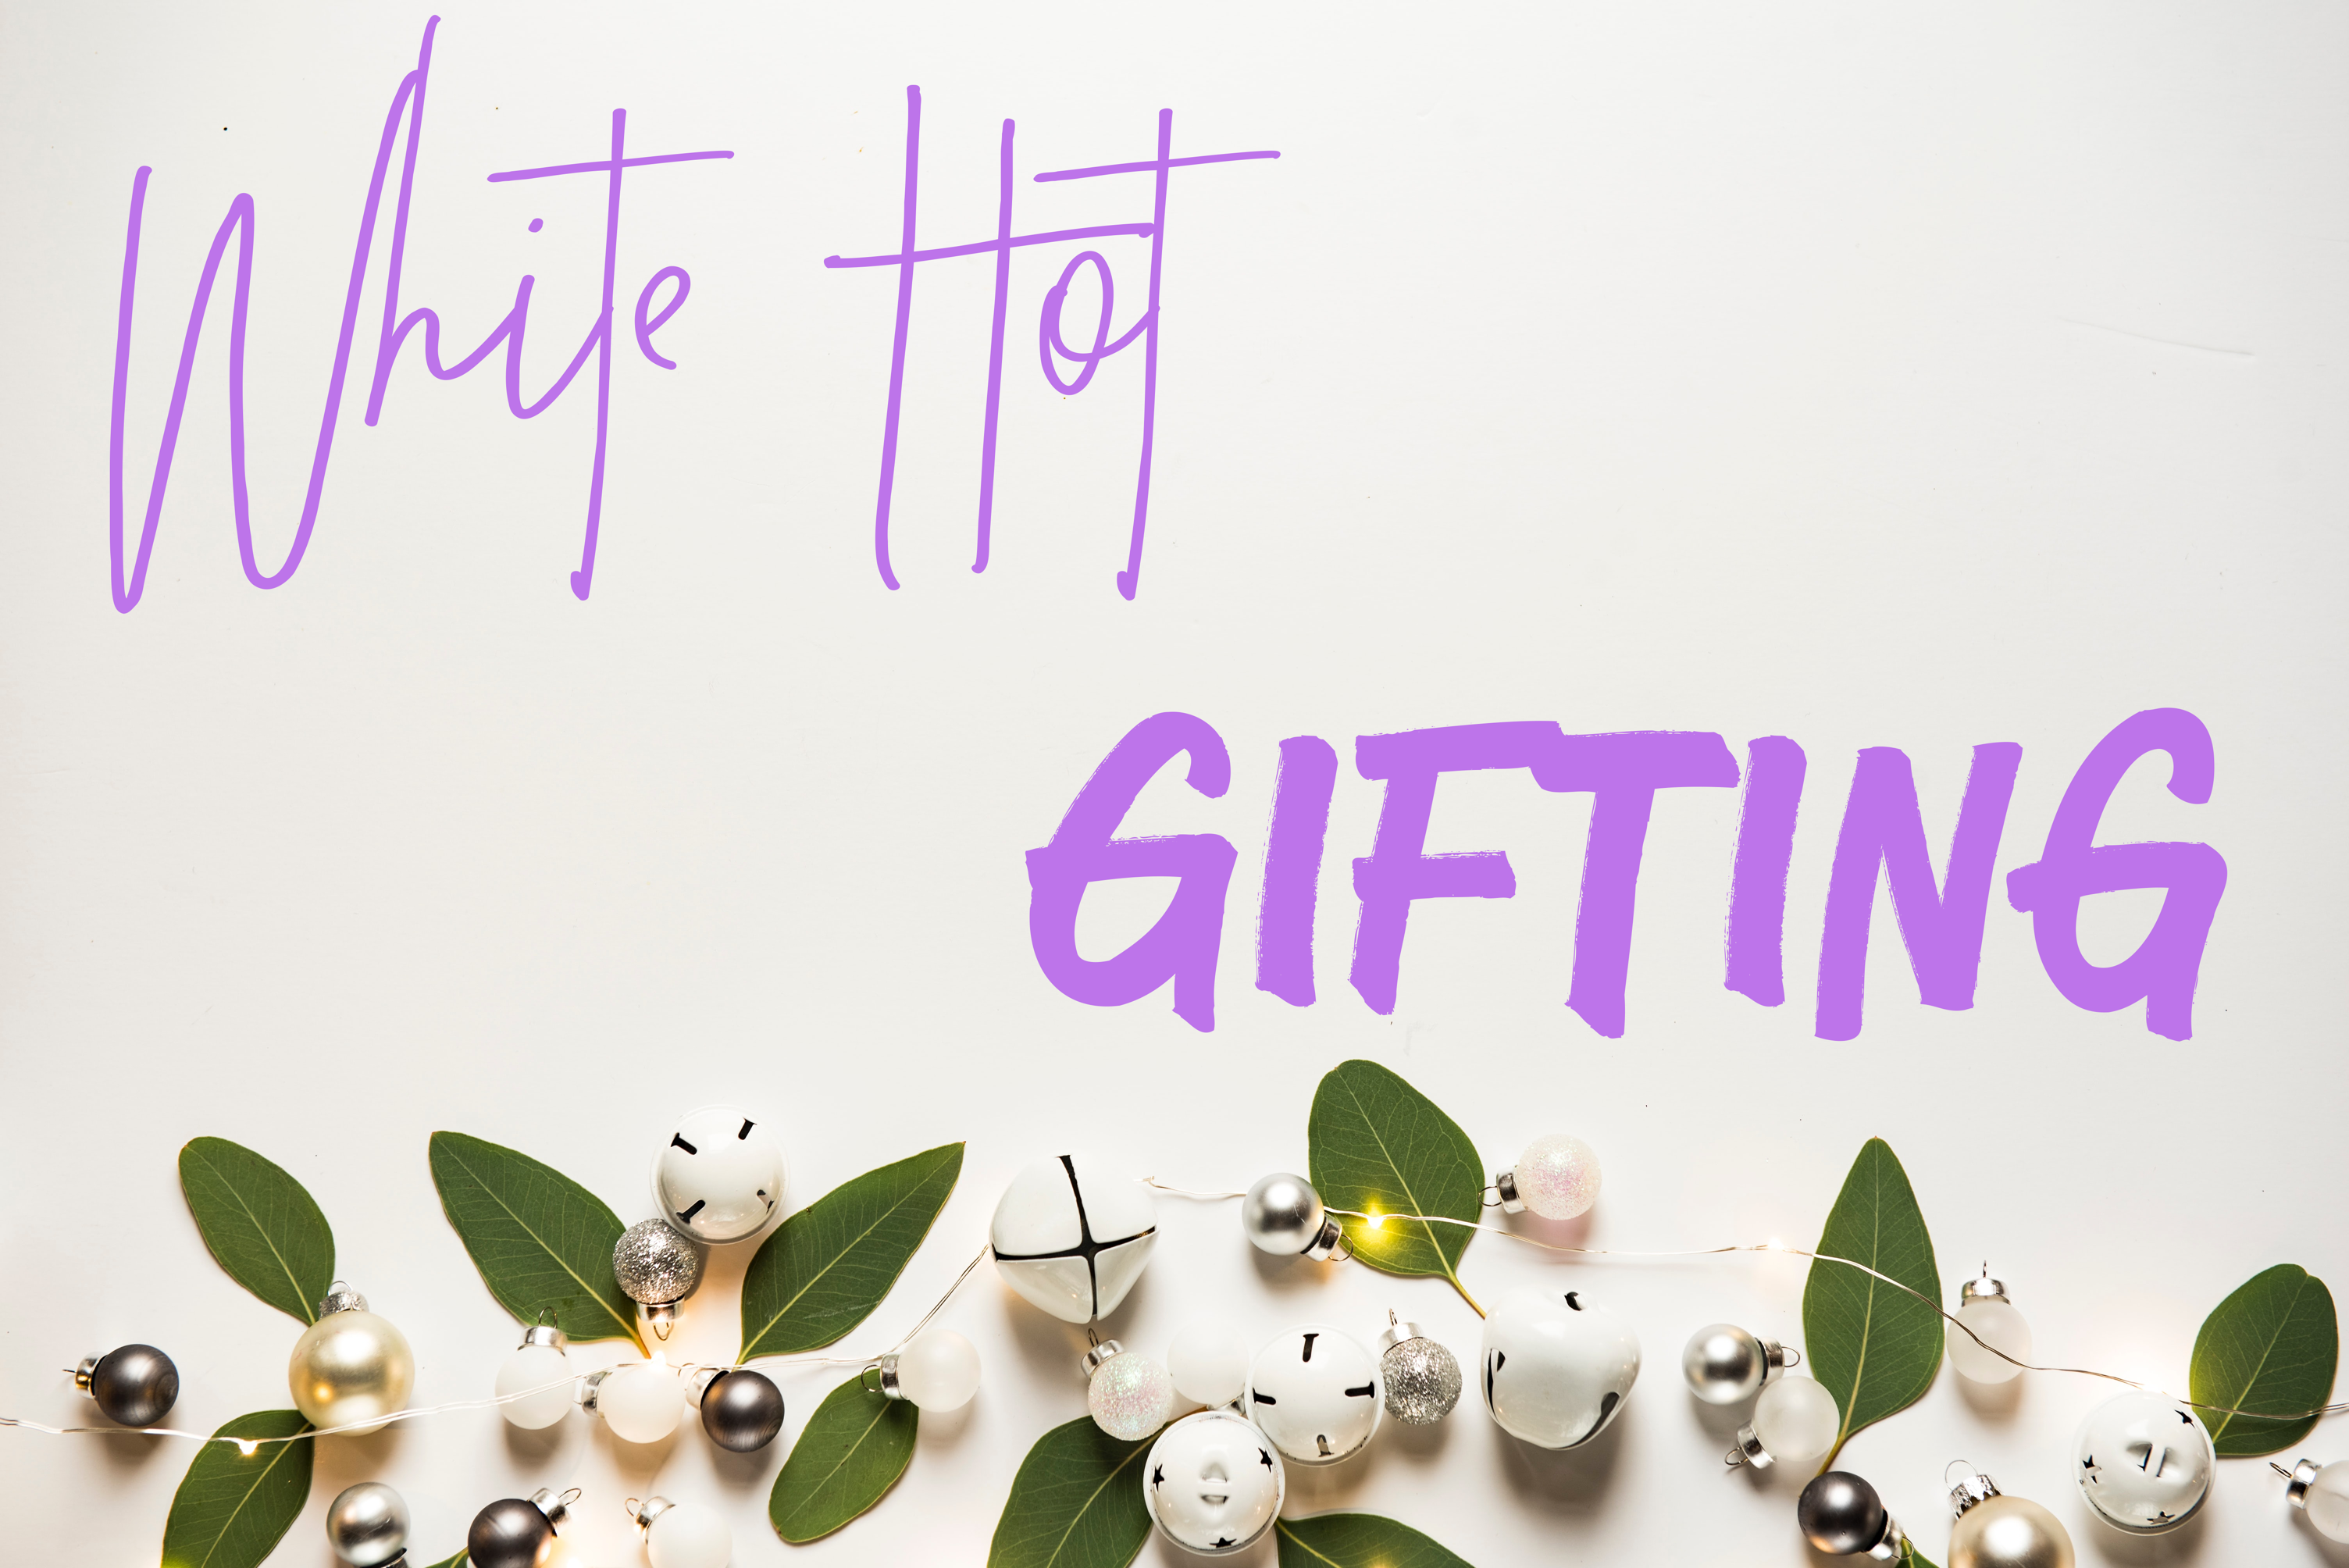 White Hot Gifting! Discover the White Hot way.....